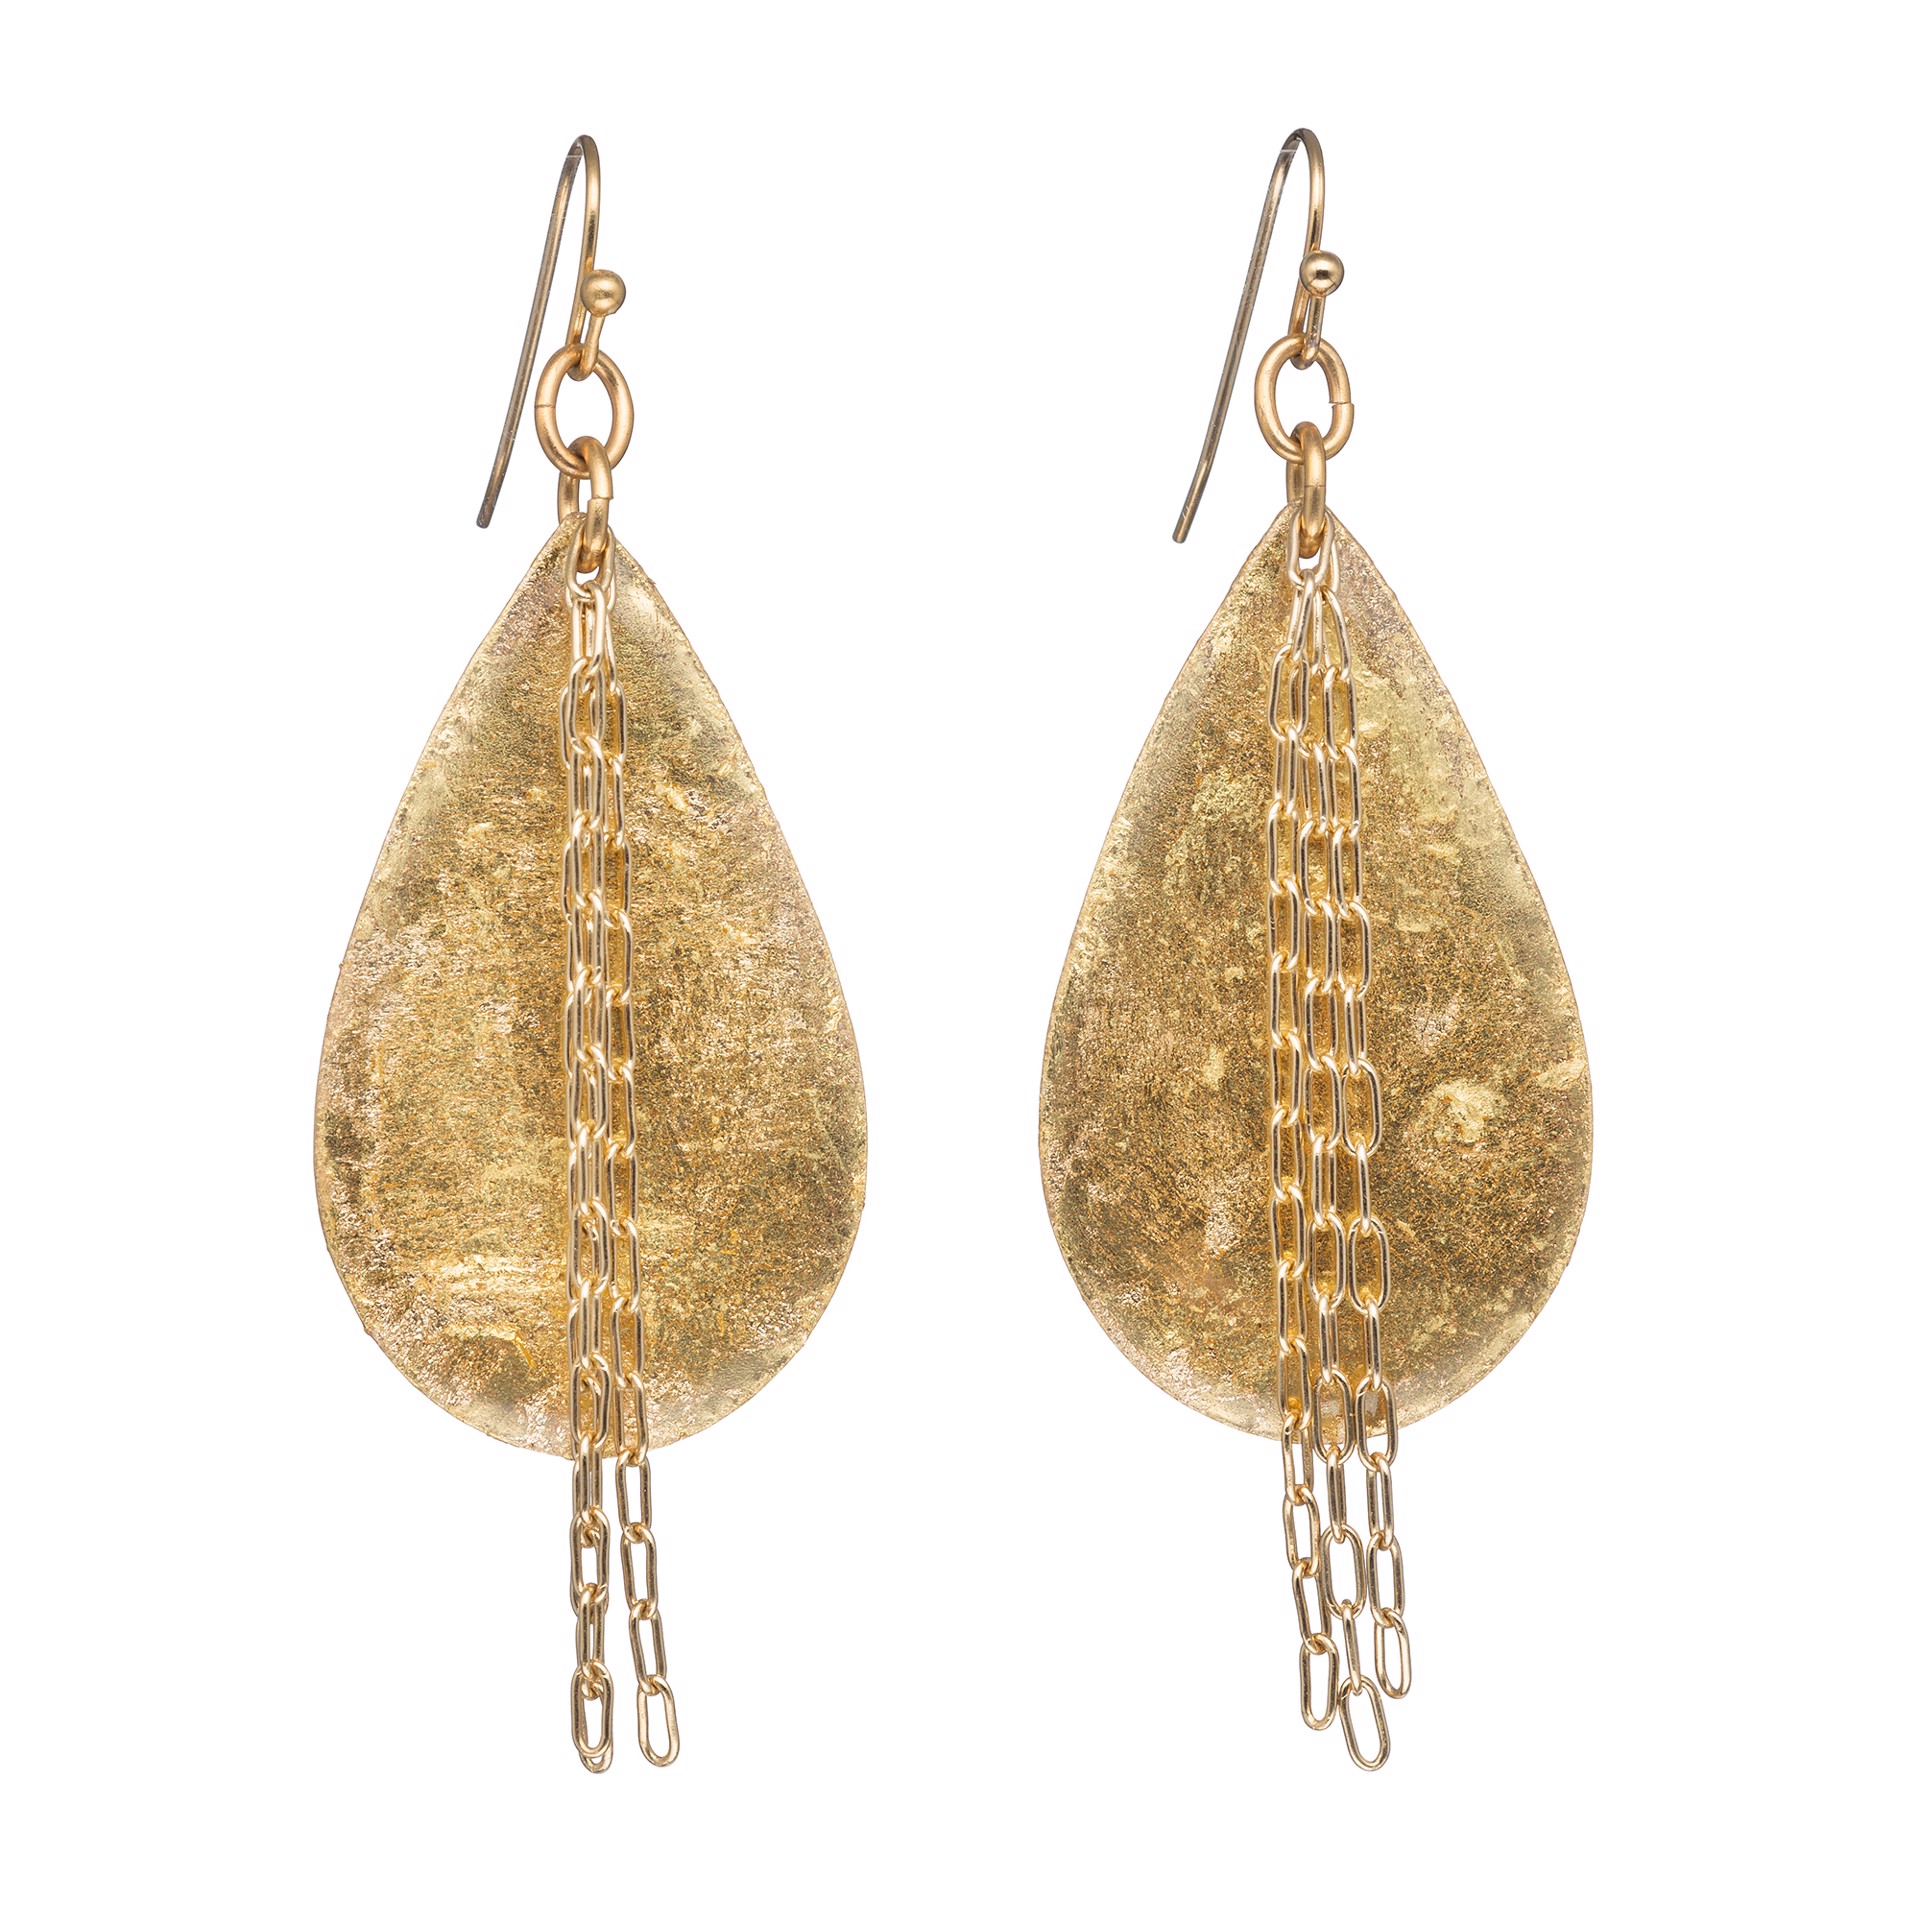 Delia Medium Teardrop Earrings, Gold with Gold Chain by Evocateur